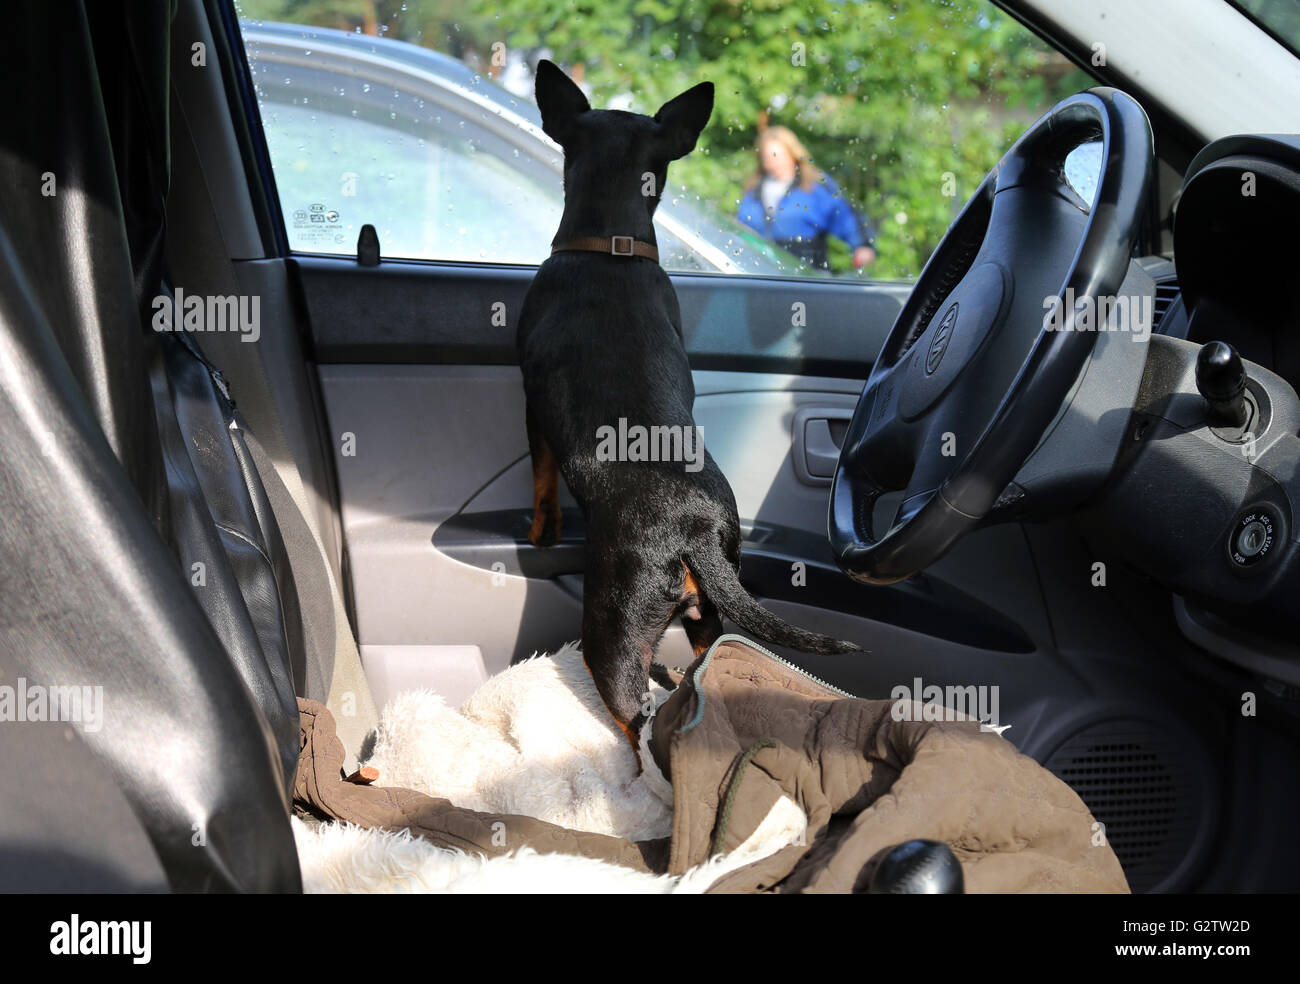 25.07.2015, Schwerin , Mecklenburg-Western Pomerania, Germany - Dog waiting sehnsuechig in the car on his owner. 00S150725D803CAROEX.JPG - NOT for SALE in G E R M A N Y, A U S T R I A, S W I T Z E R L A N D [MODEL RELEASE: NO, PROPERTY RELEASE: NO, (c) caro photo agency / Sorge, http://www.caro-images.com, info@carofoto.pl - Any use of this picture is subject to royalty!] Stock Photo